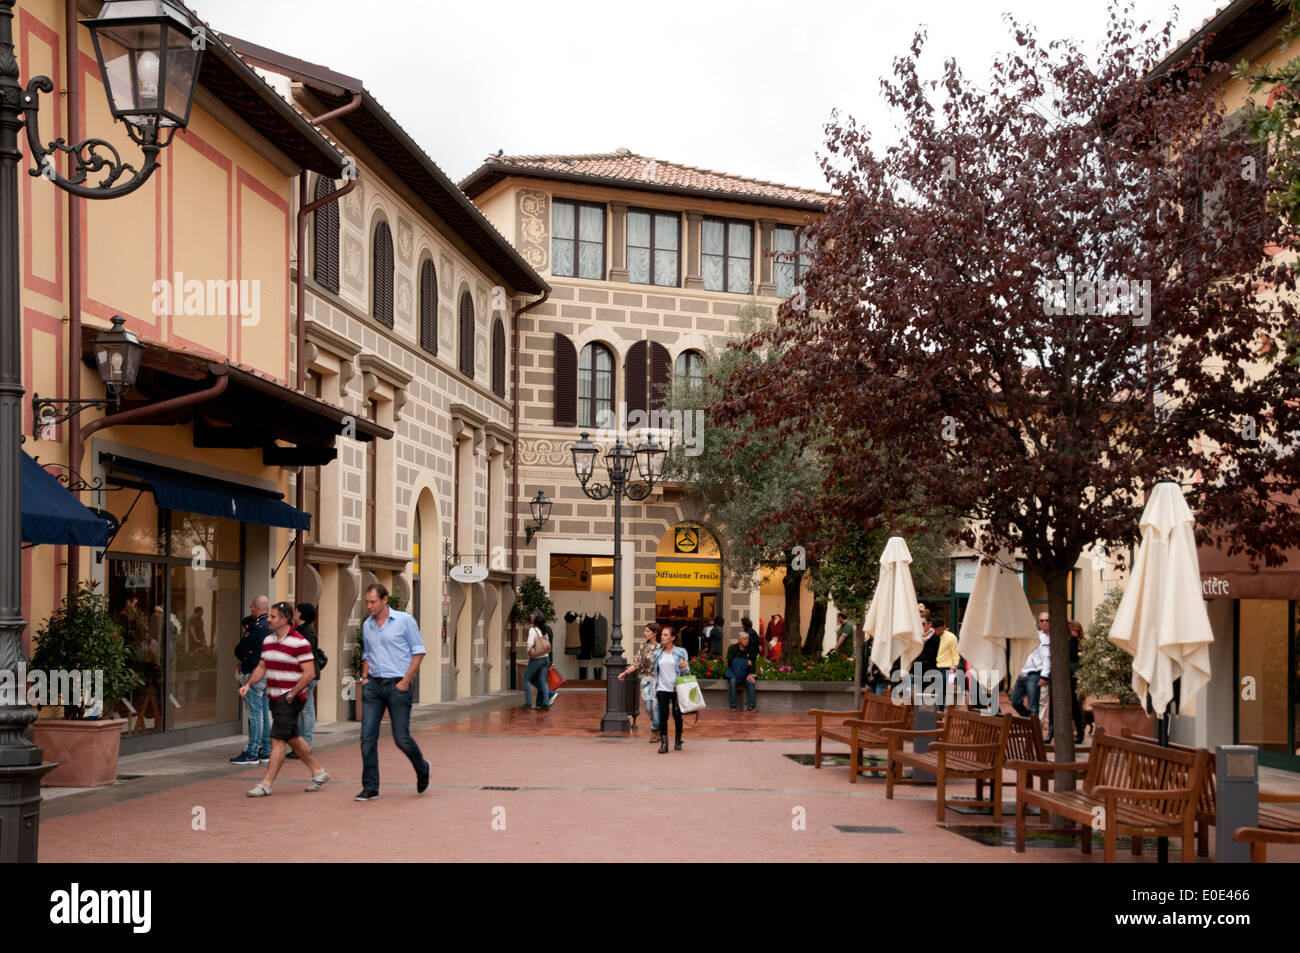 People shopping in McArthurGlen Barberino Designer Outlet arcade Stock Photo: 69152110 - Alamy